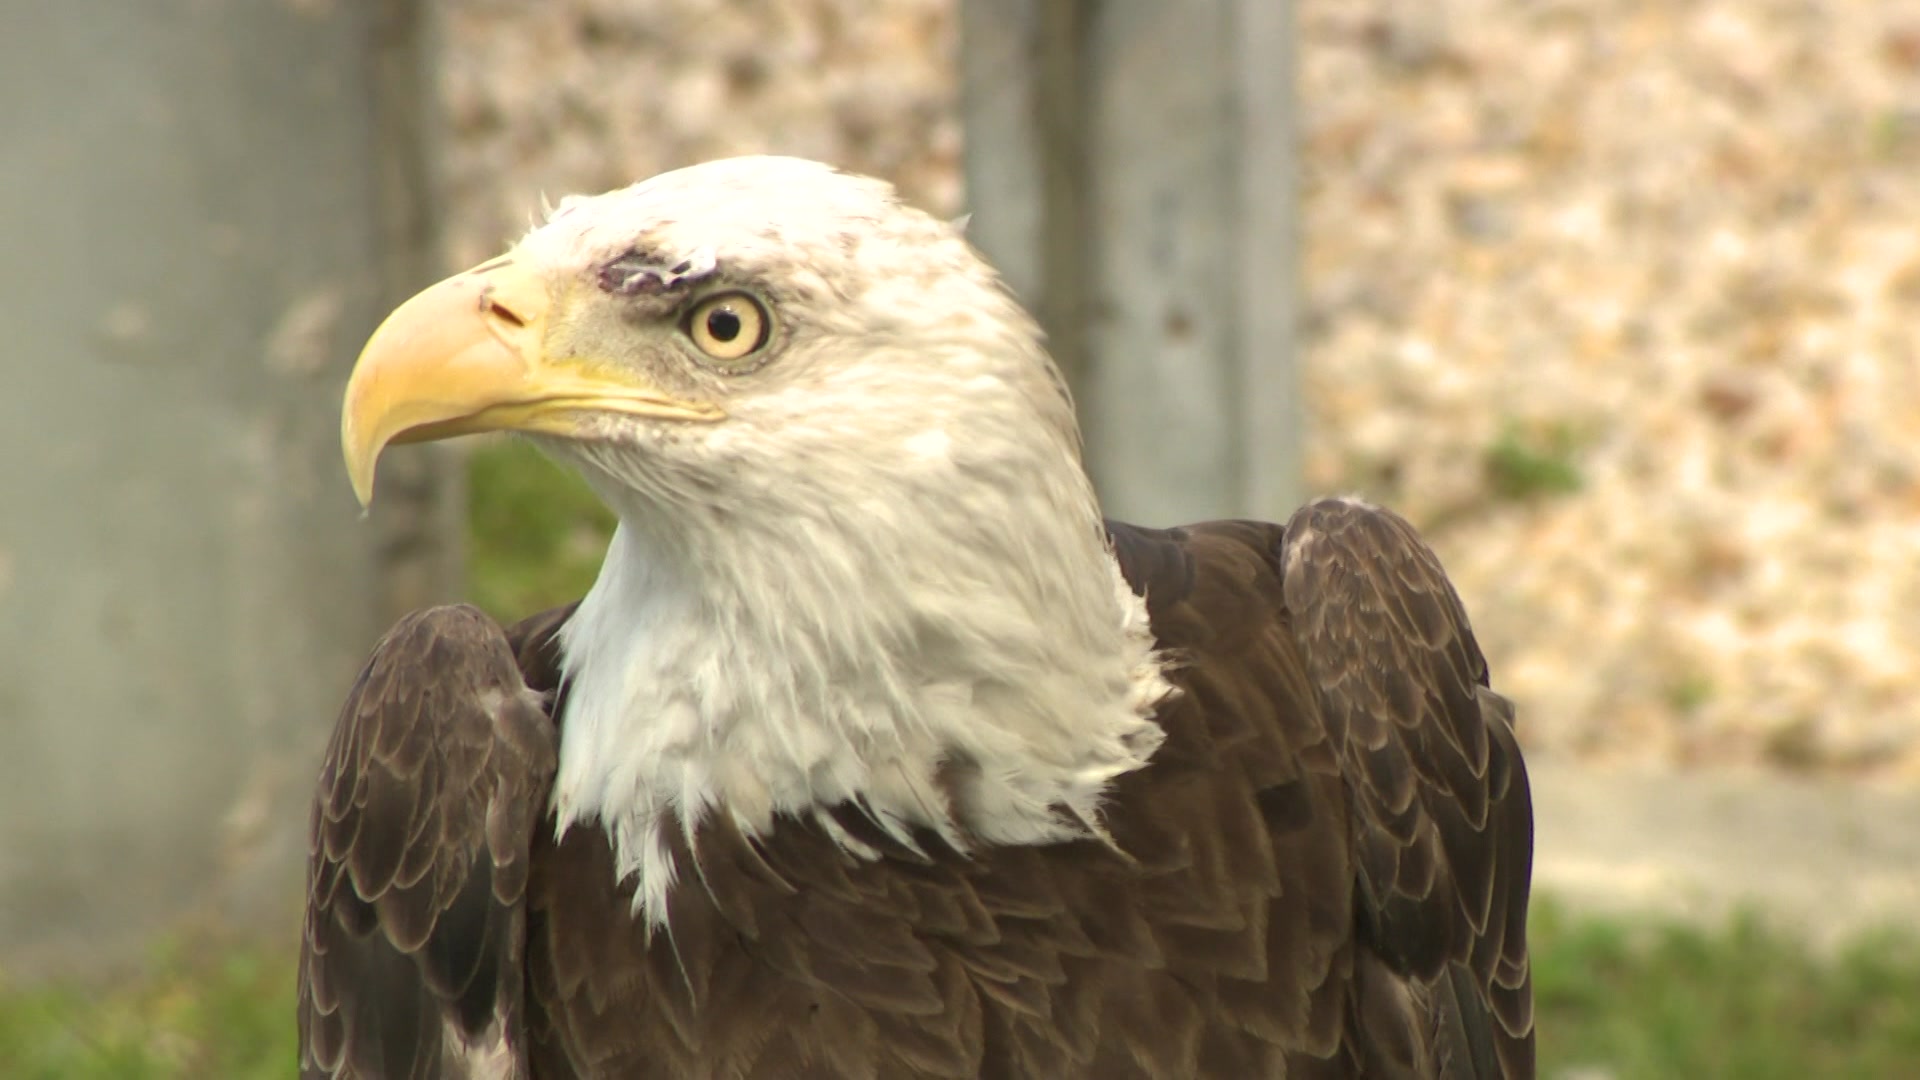 South Florida’s Bald Eagles Ron, Rita, Great Example Of Efforts To Save Endangered Species